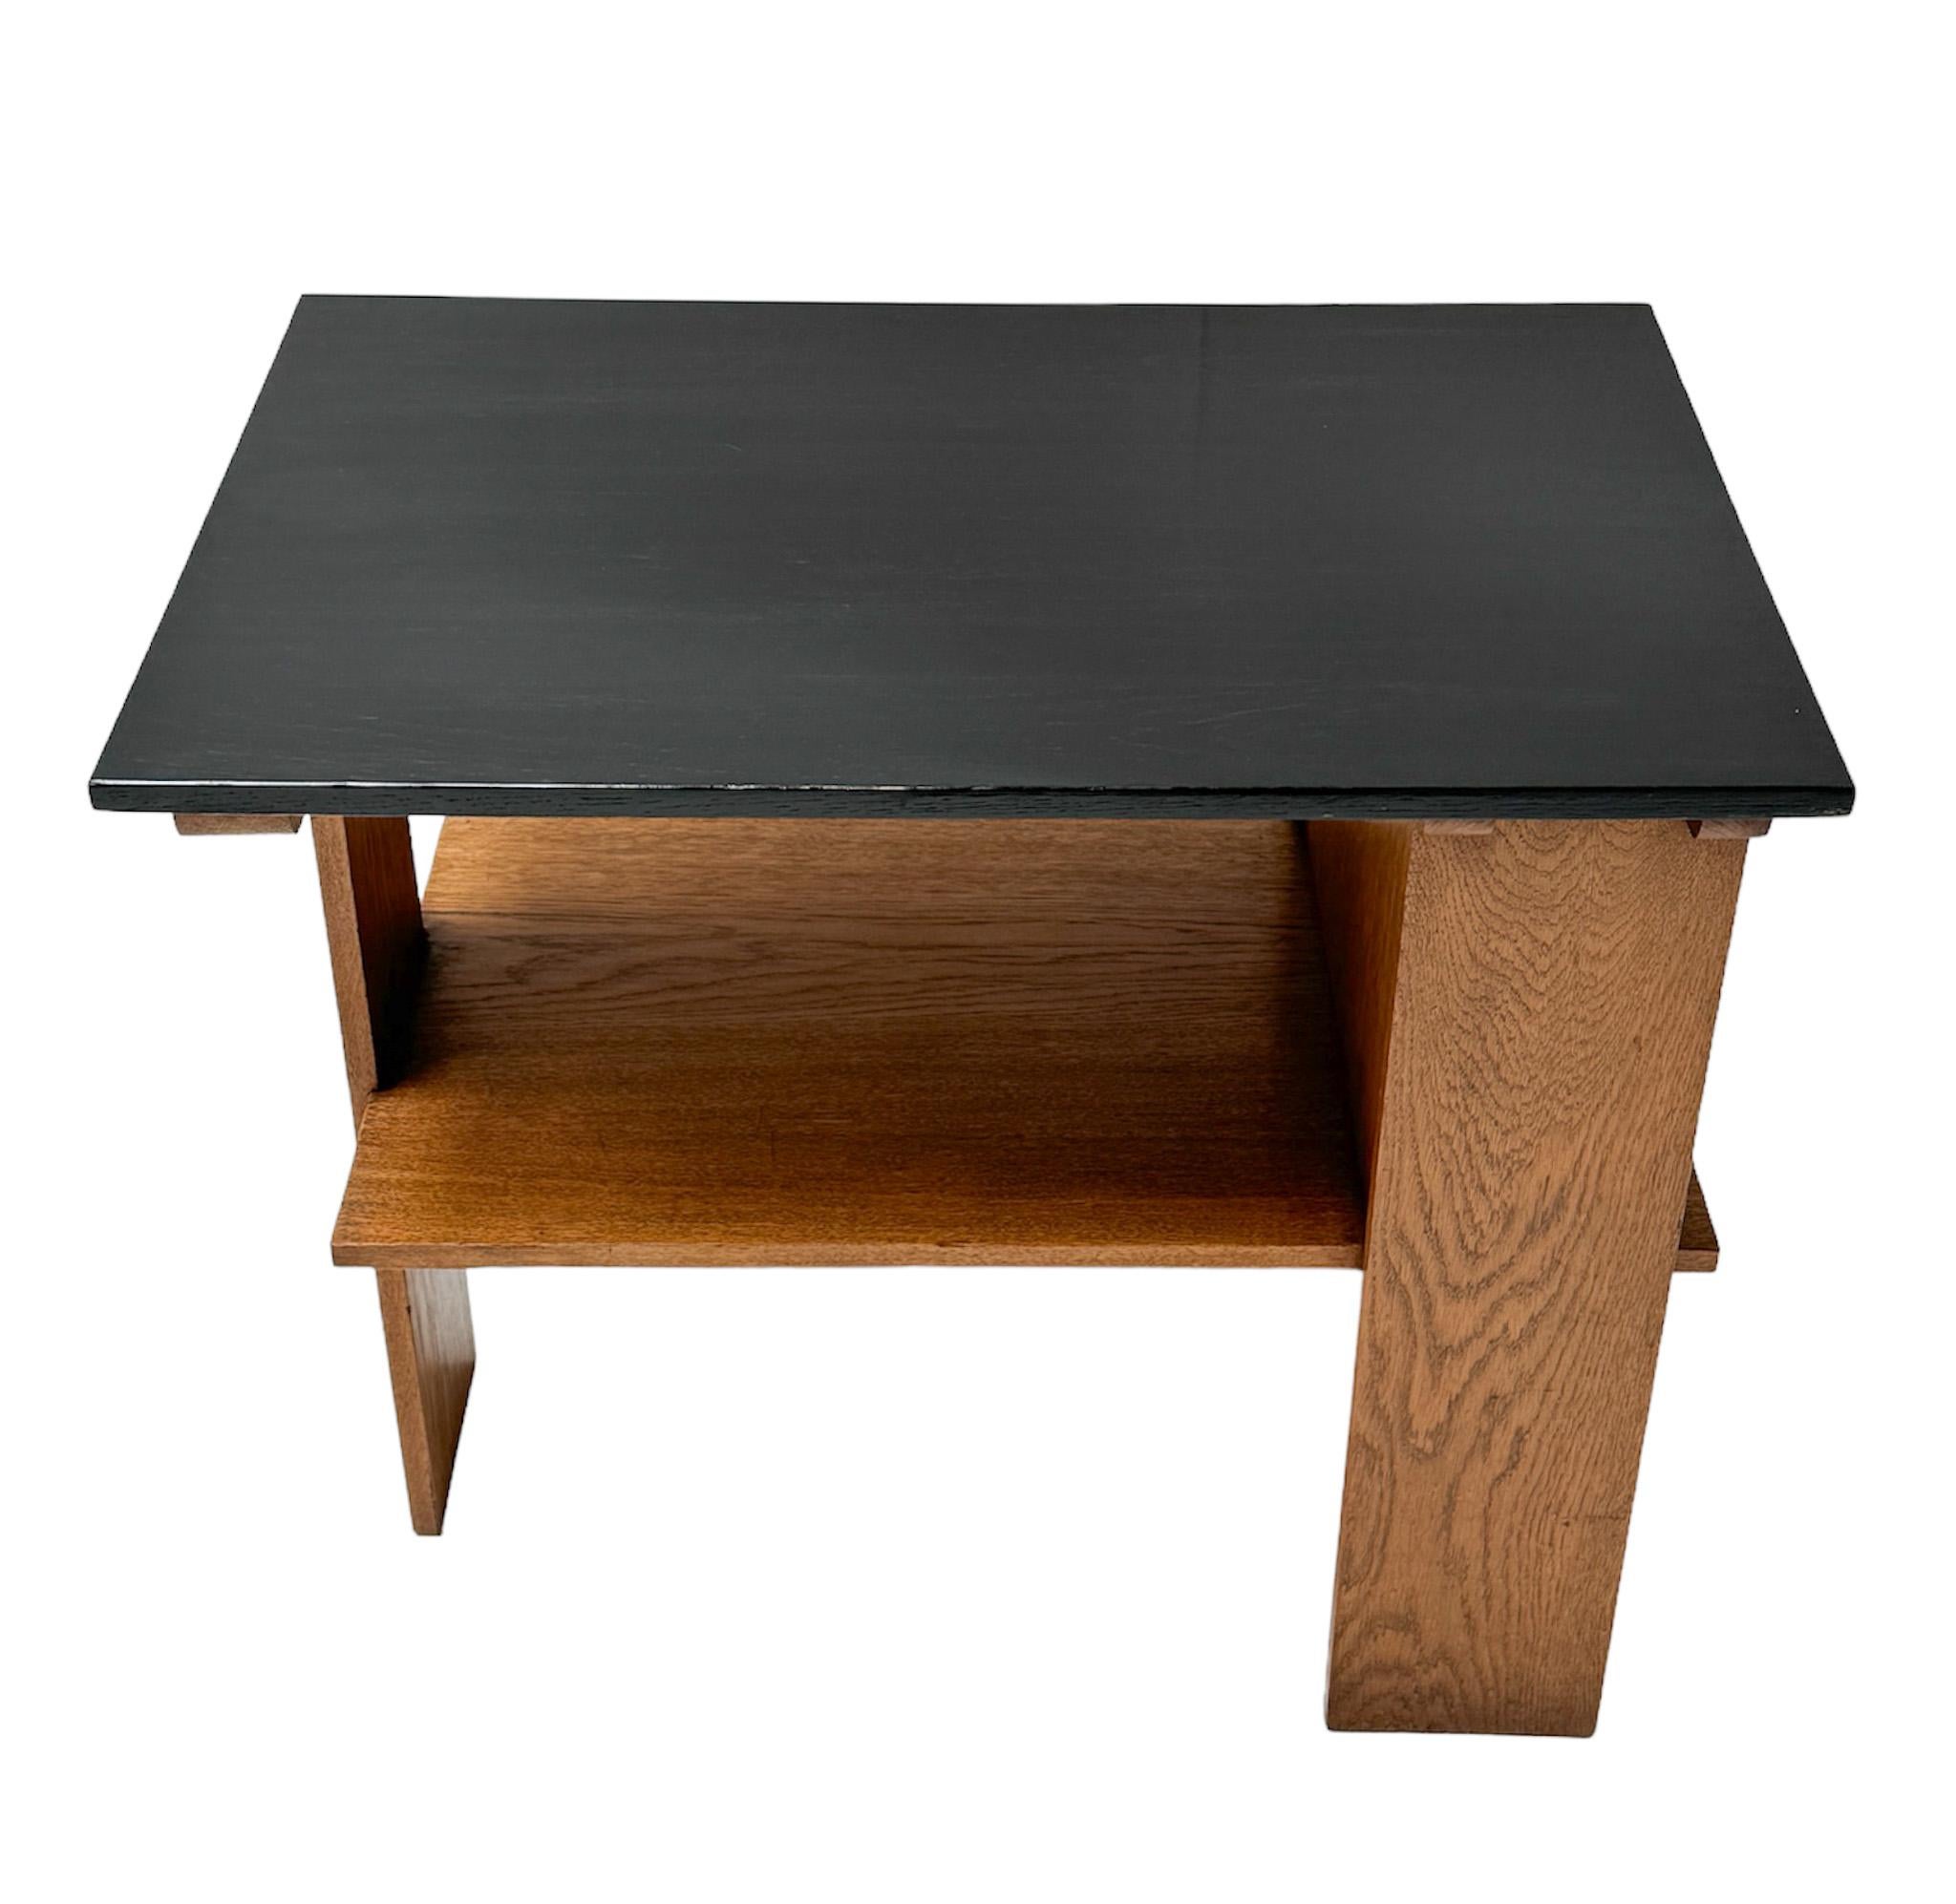 Early 20th Century Oak Art Deco Modernist Serving Table by Cor Alons, 1920s For Sale